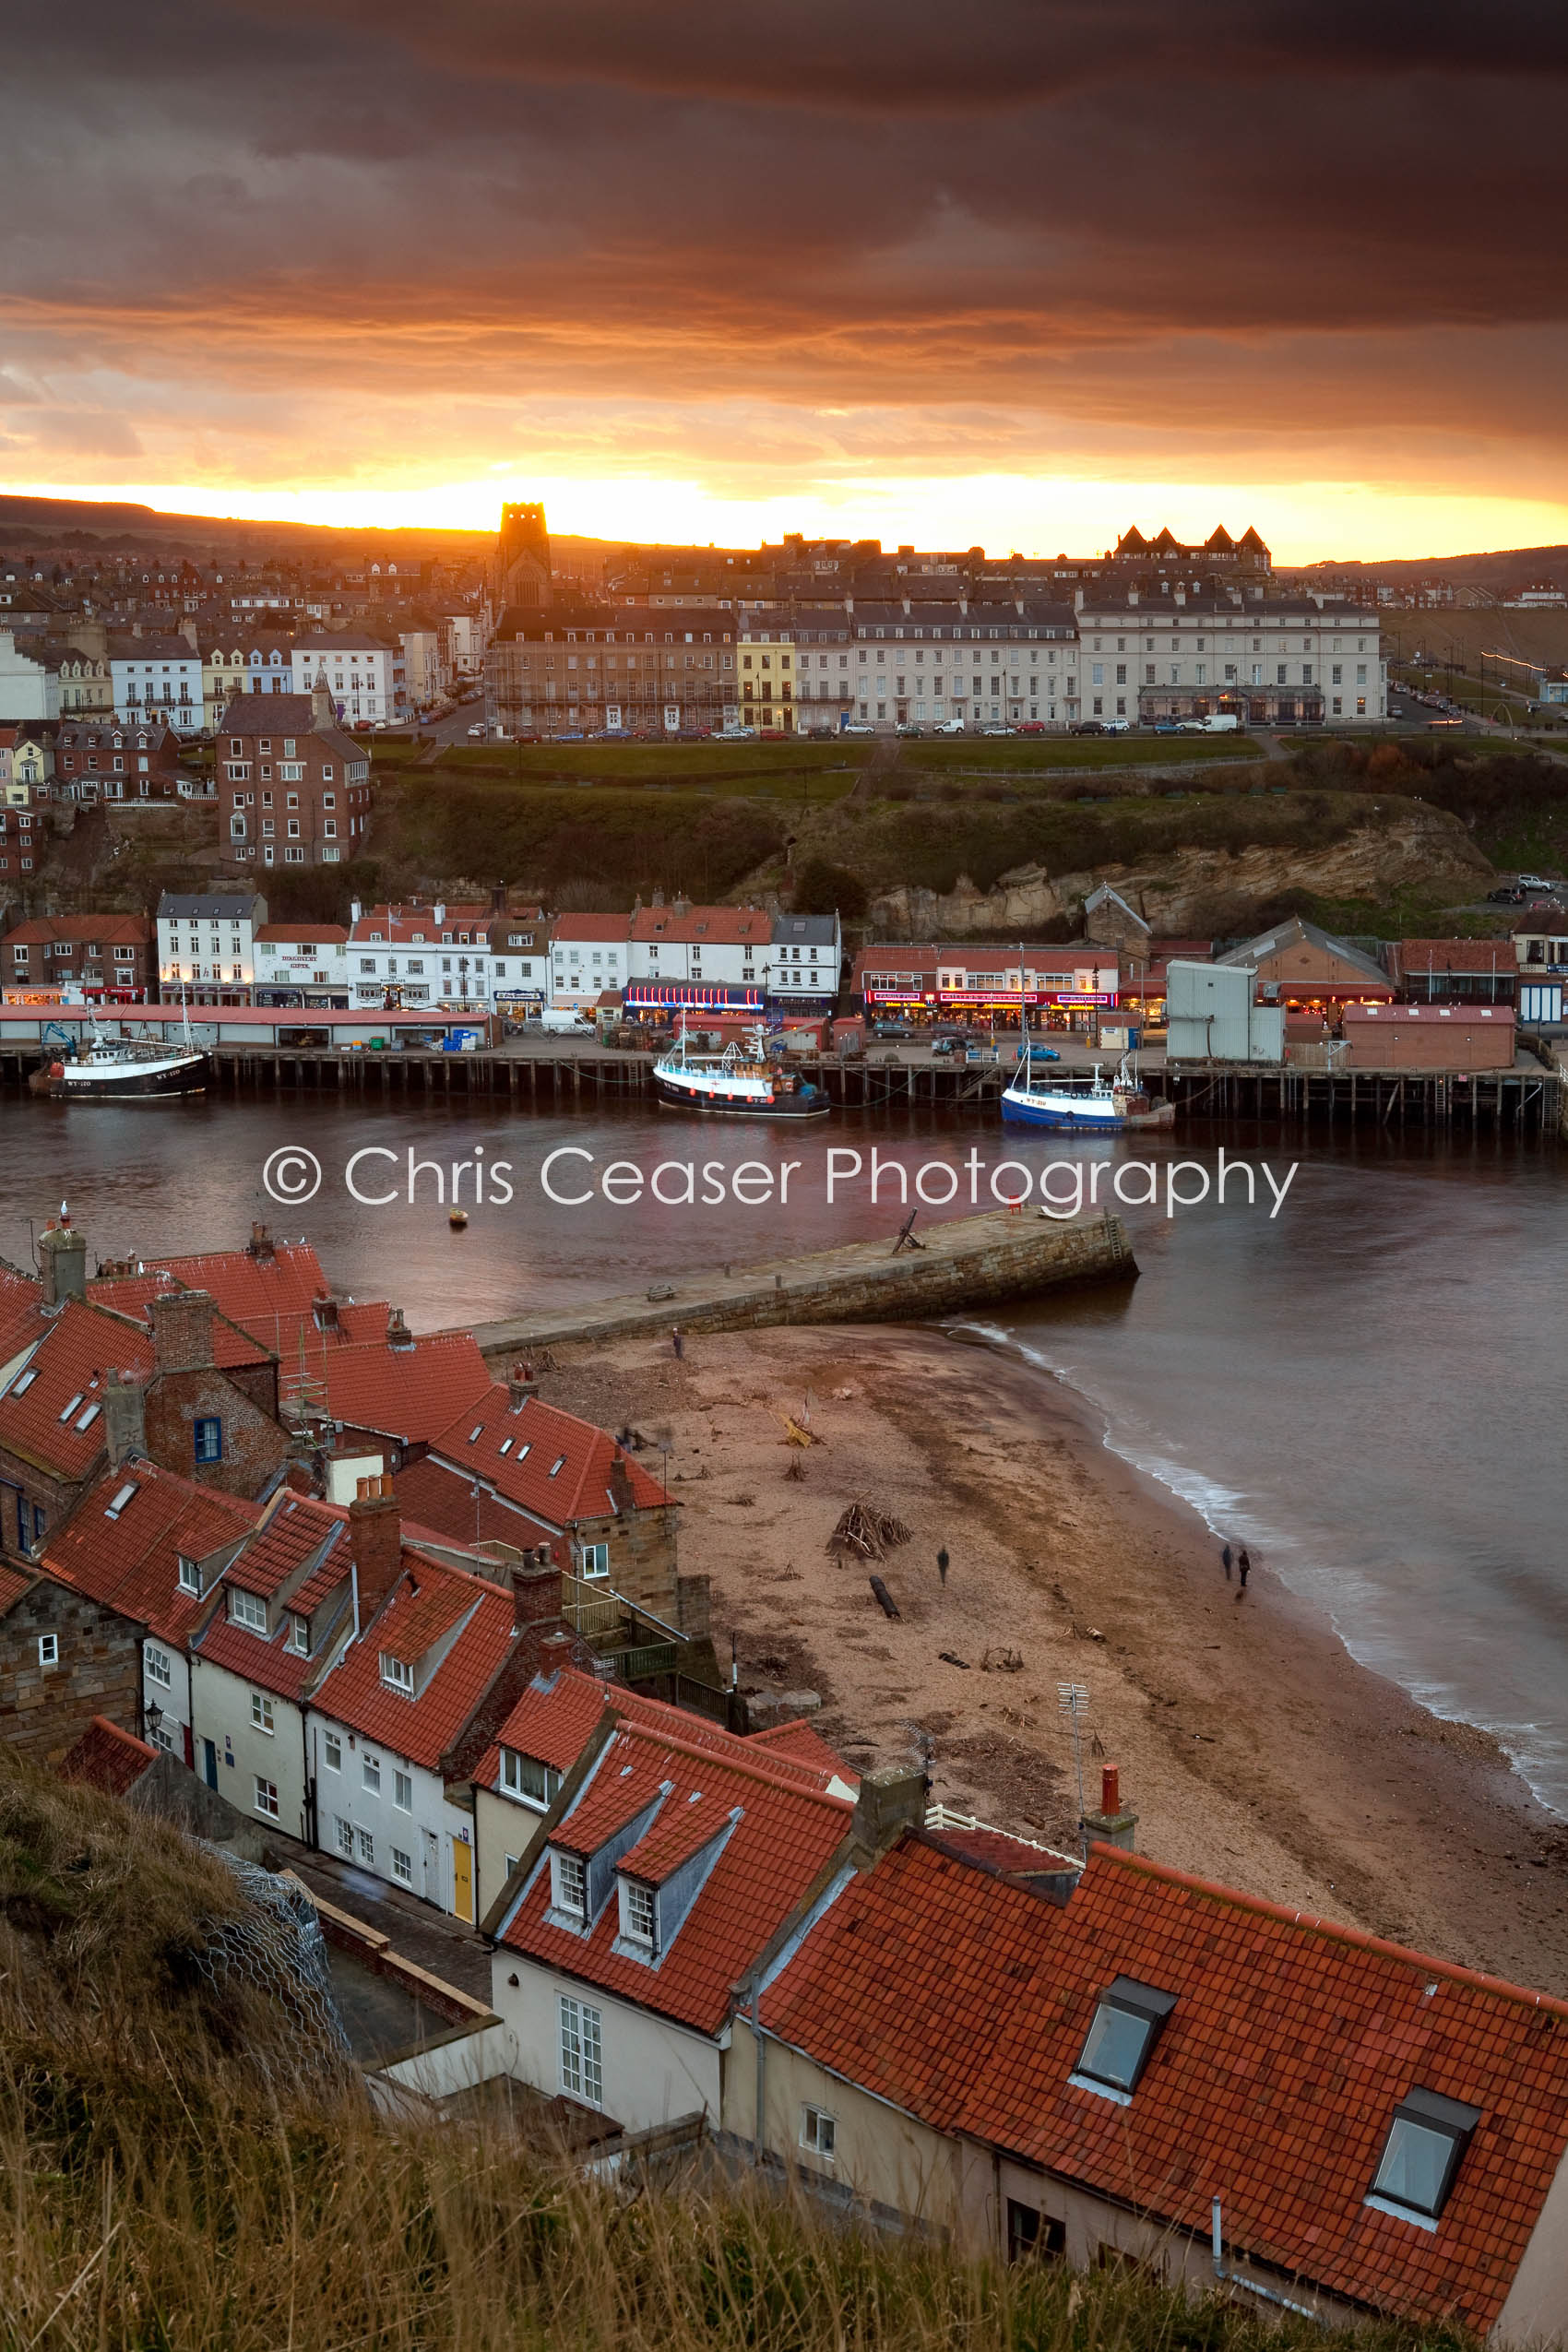 Above the old jet mines, Whitby